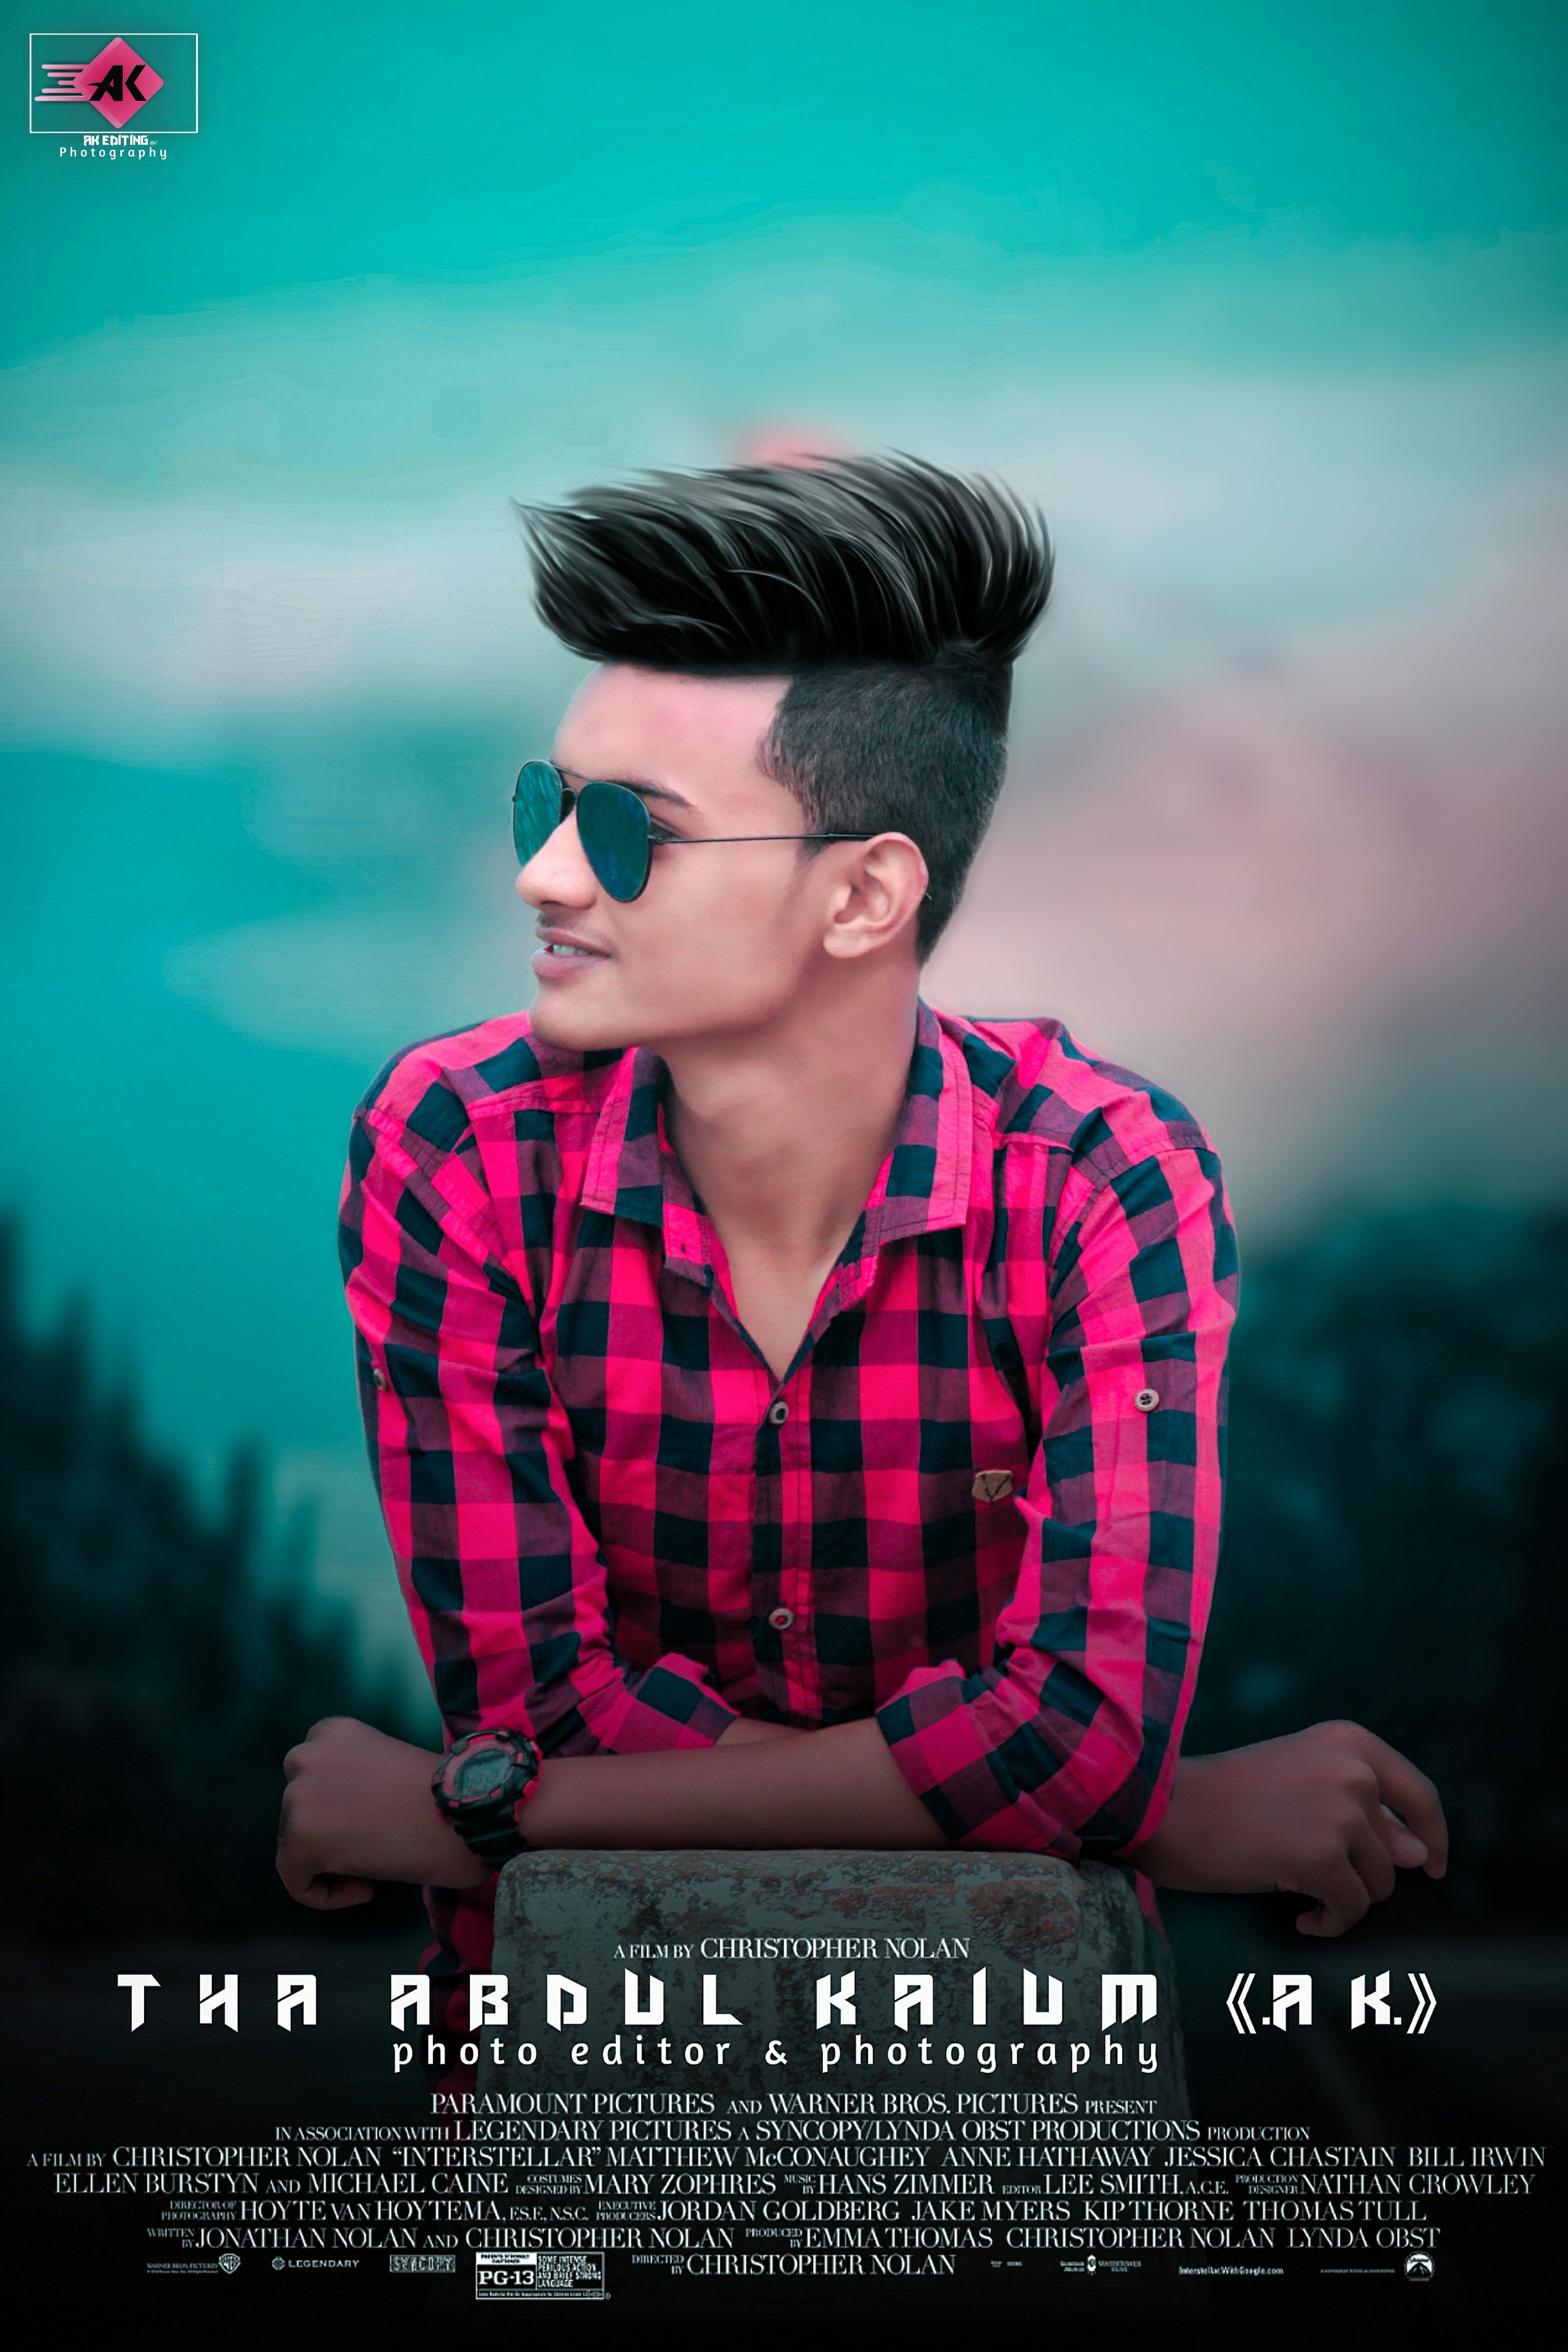 If You looking CB Background for Picsart Editing So Im Sharing lot of New  CB Back  Beach background images Dslr background images Blur background  photography